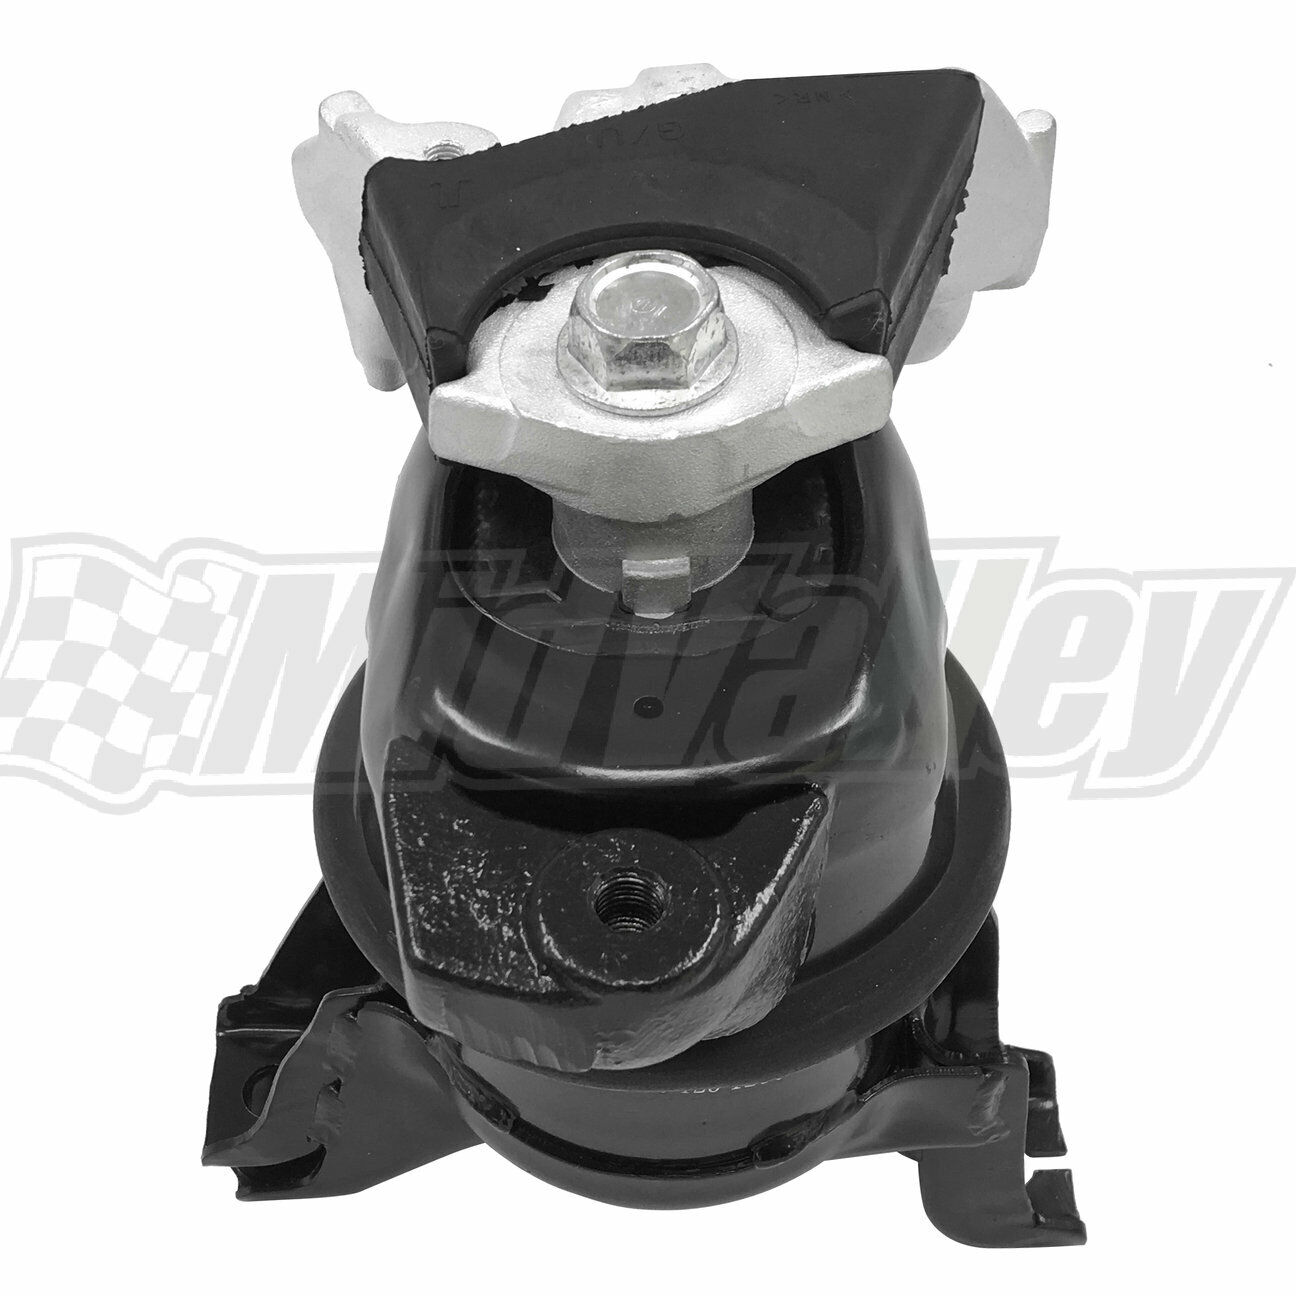 Front Engine Motor Mount For 2012-2014 Honda Civic 1.8L for Auto Trans.